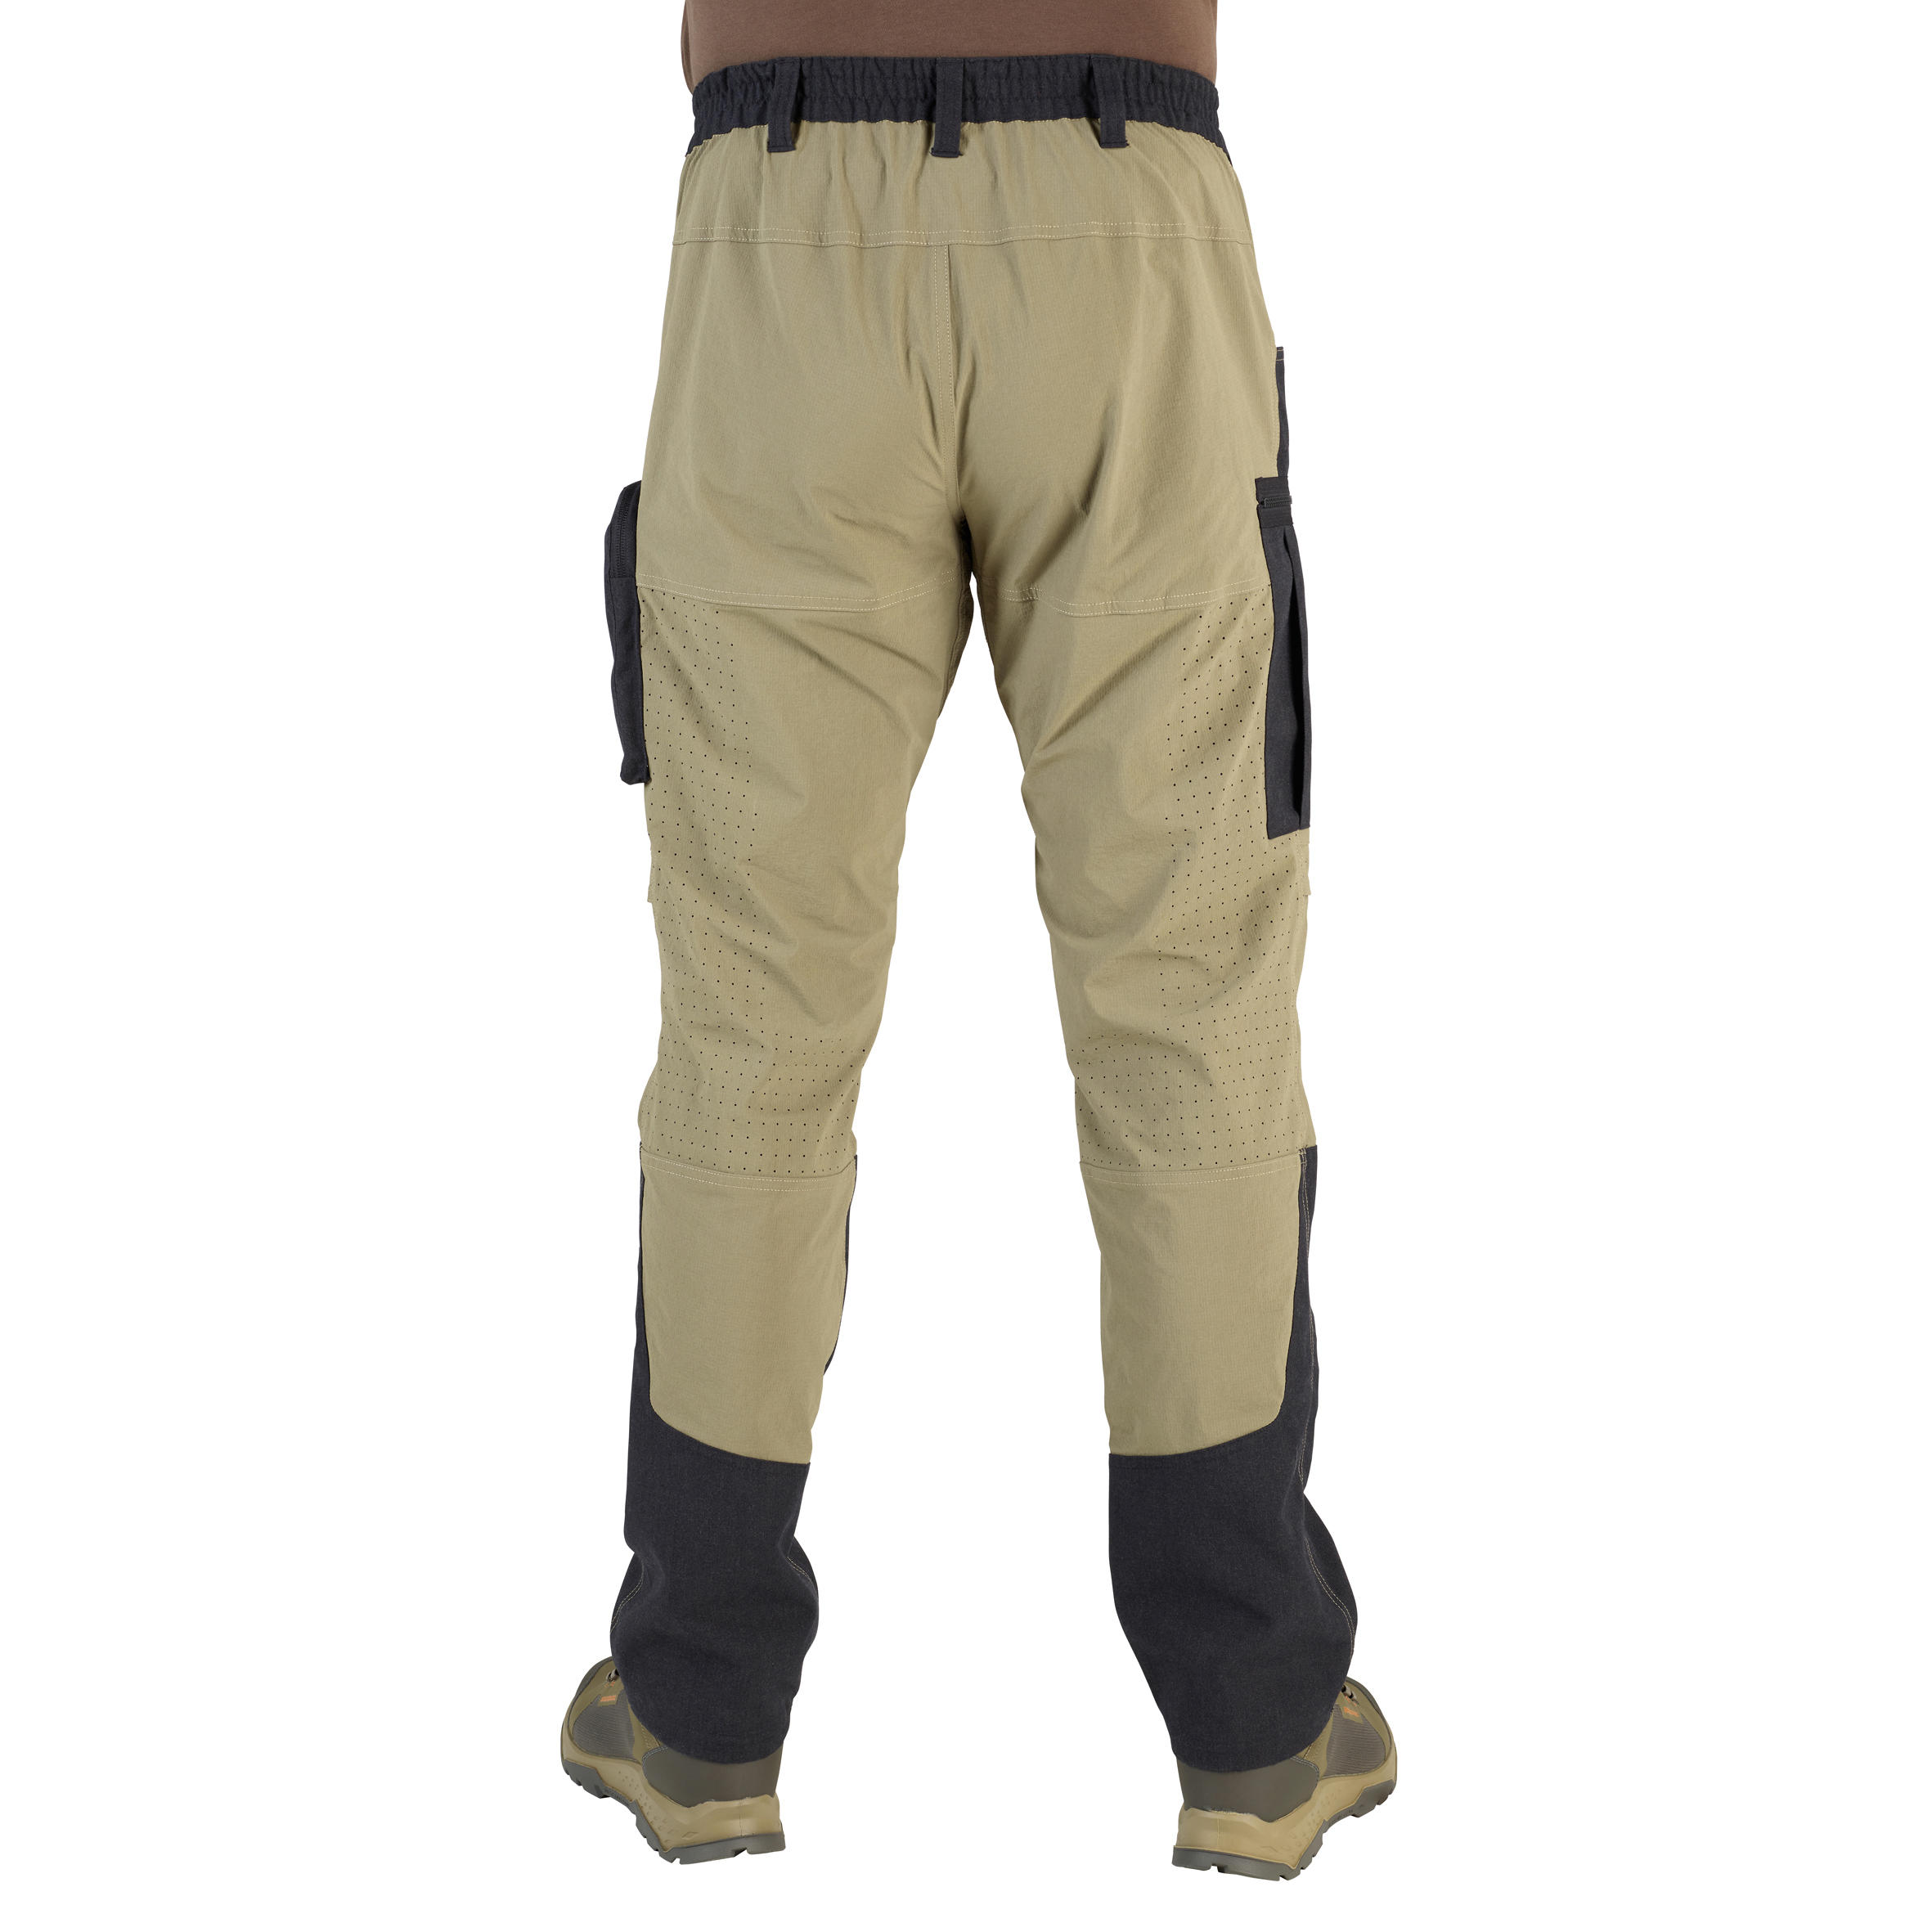 Lightweight Breathable Trousers - Light Green 2/6